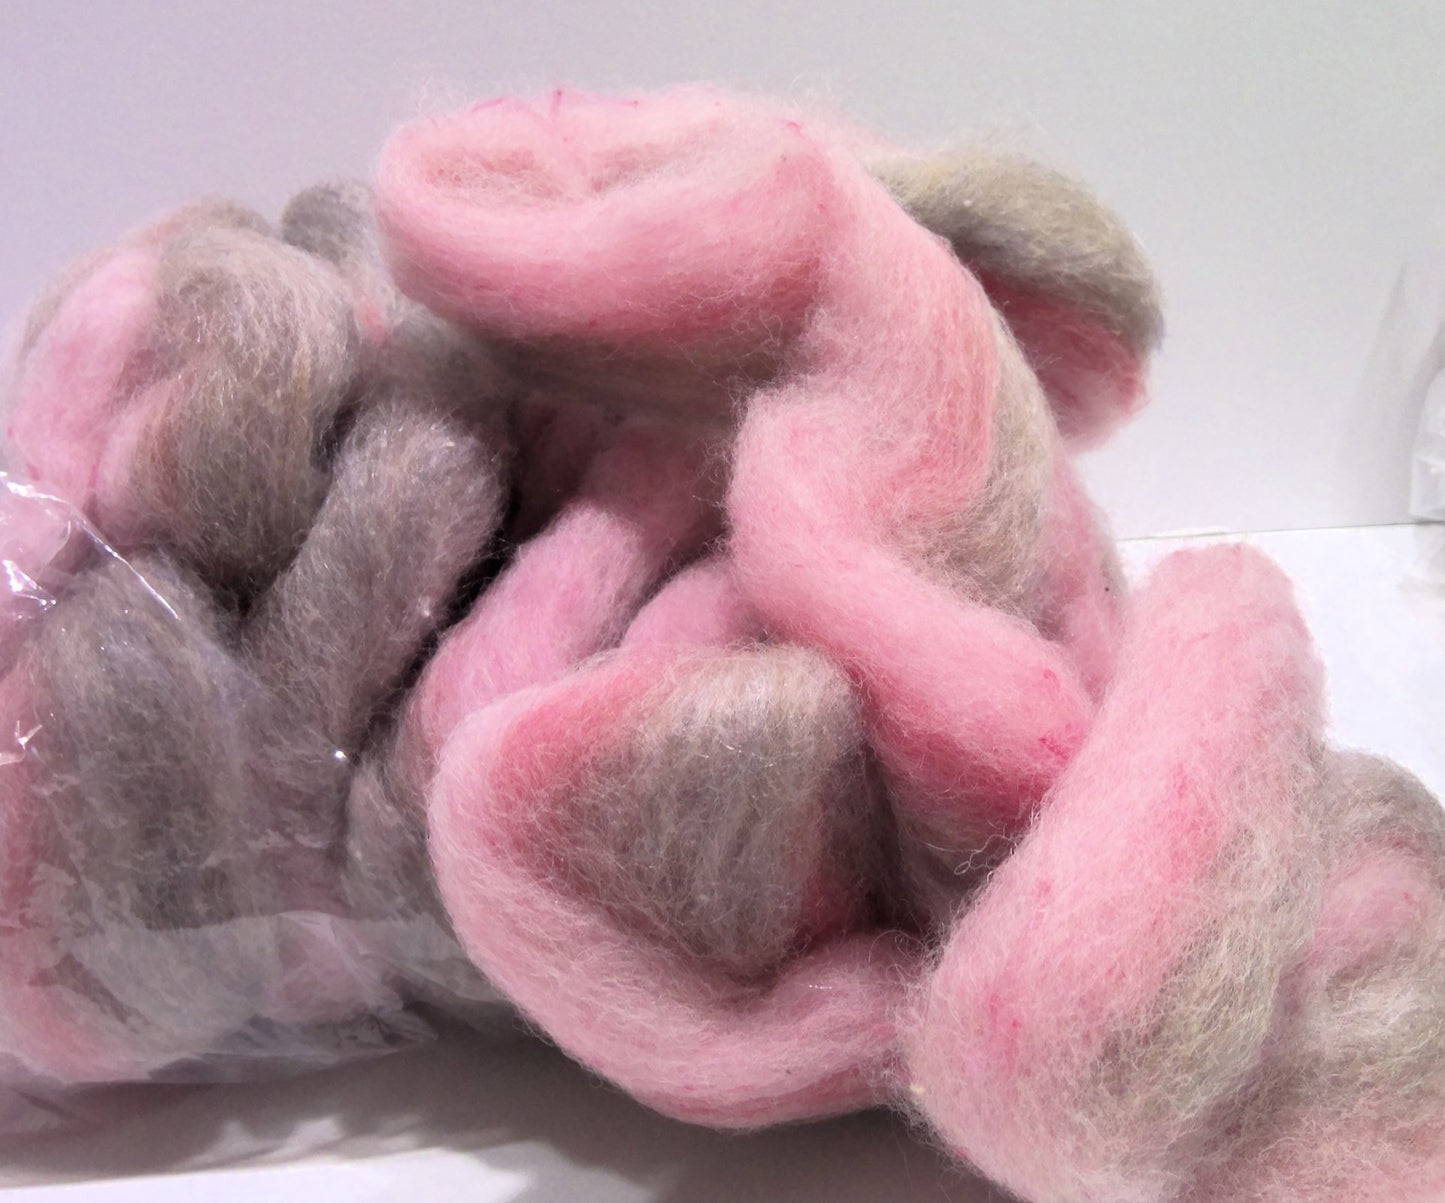 Mill Monster roving 2 oz Pink/Grey